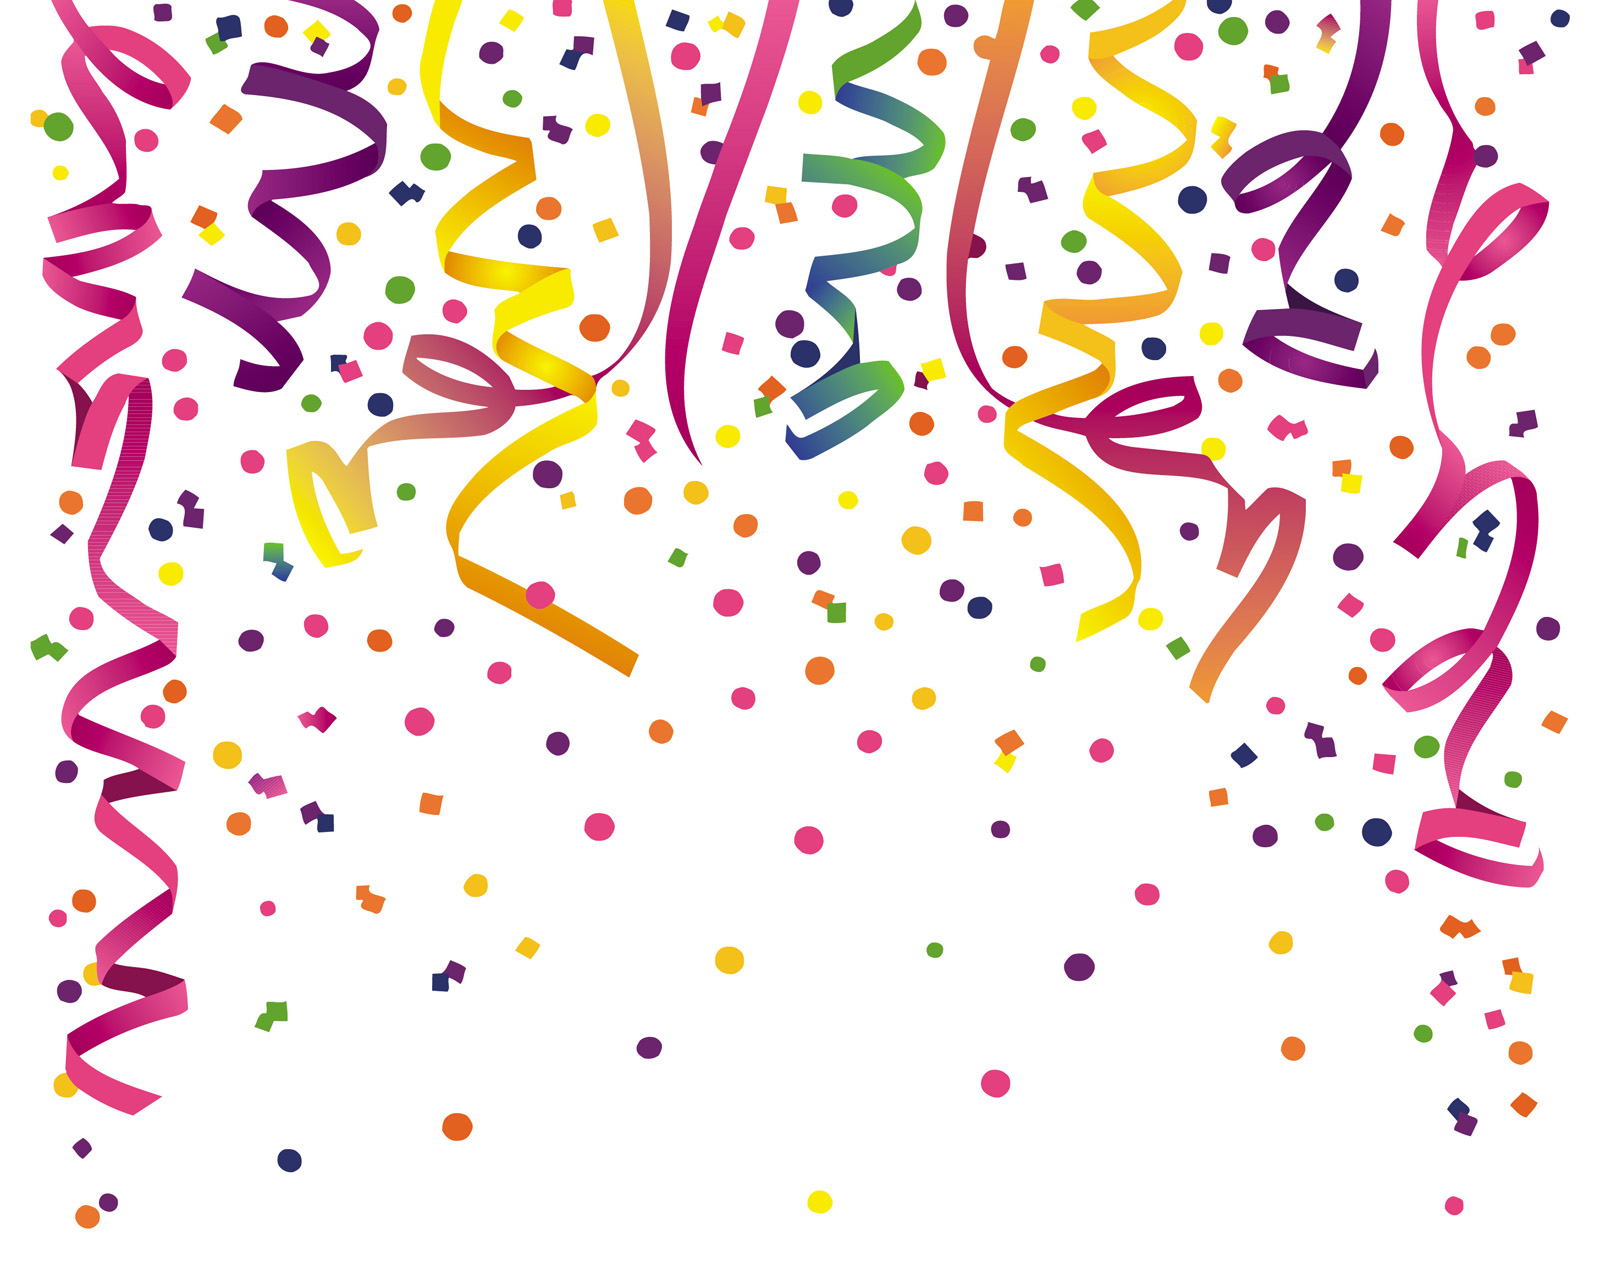 Variations on a confetti PPT Backgrounds